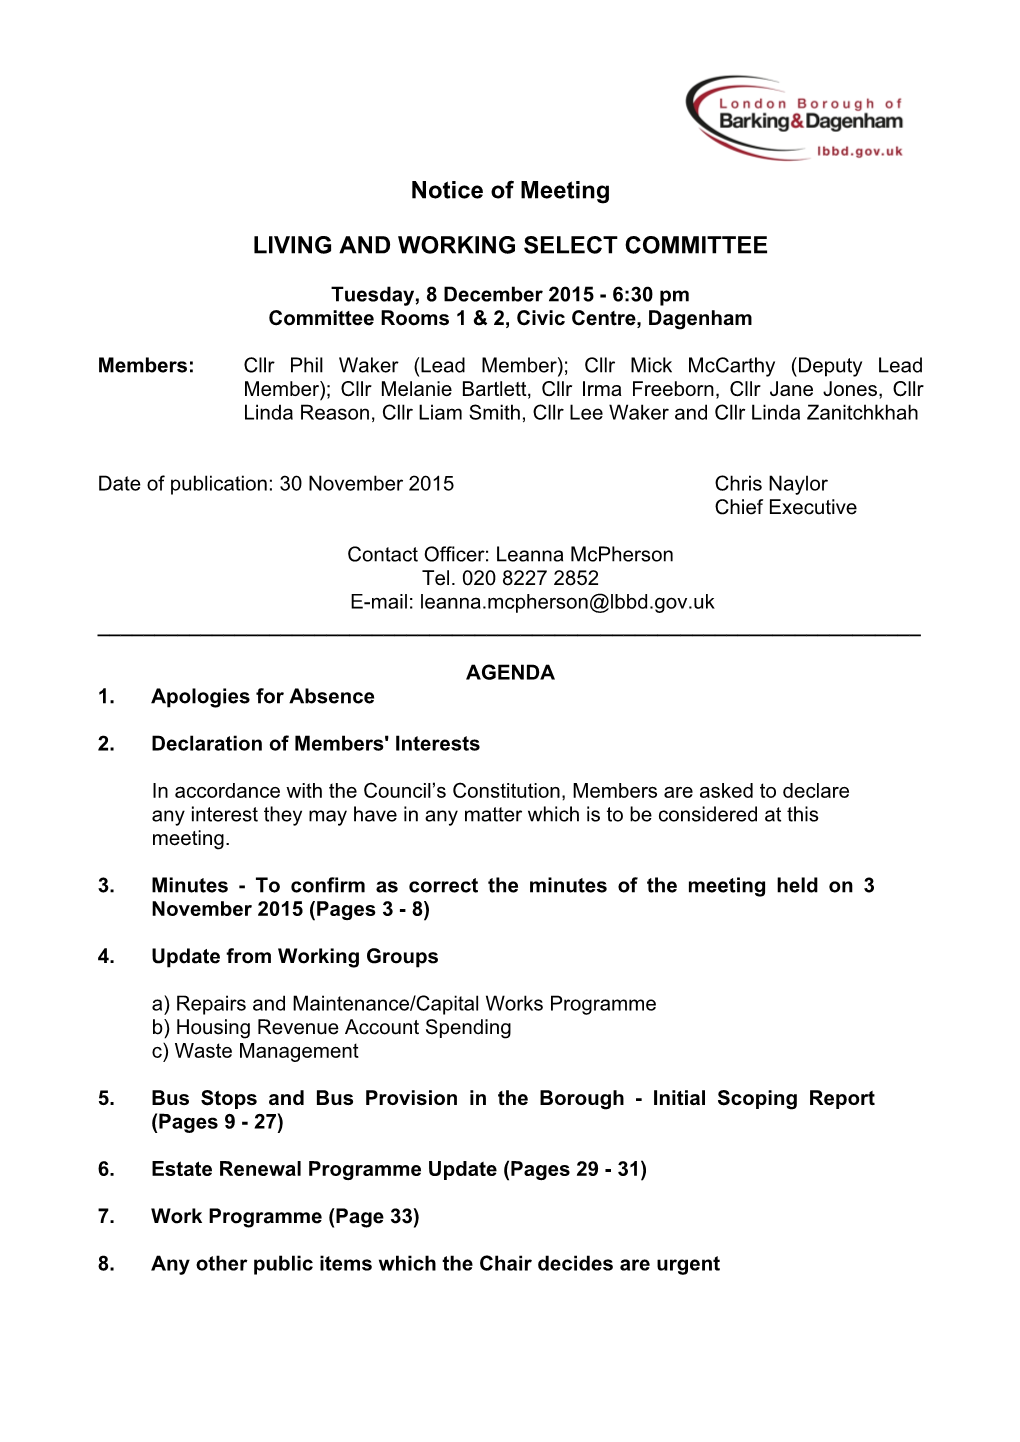 (Public Pack)Agenda Document for Living and Working Select